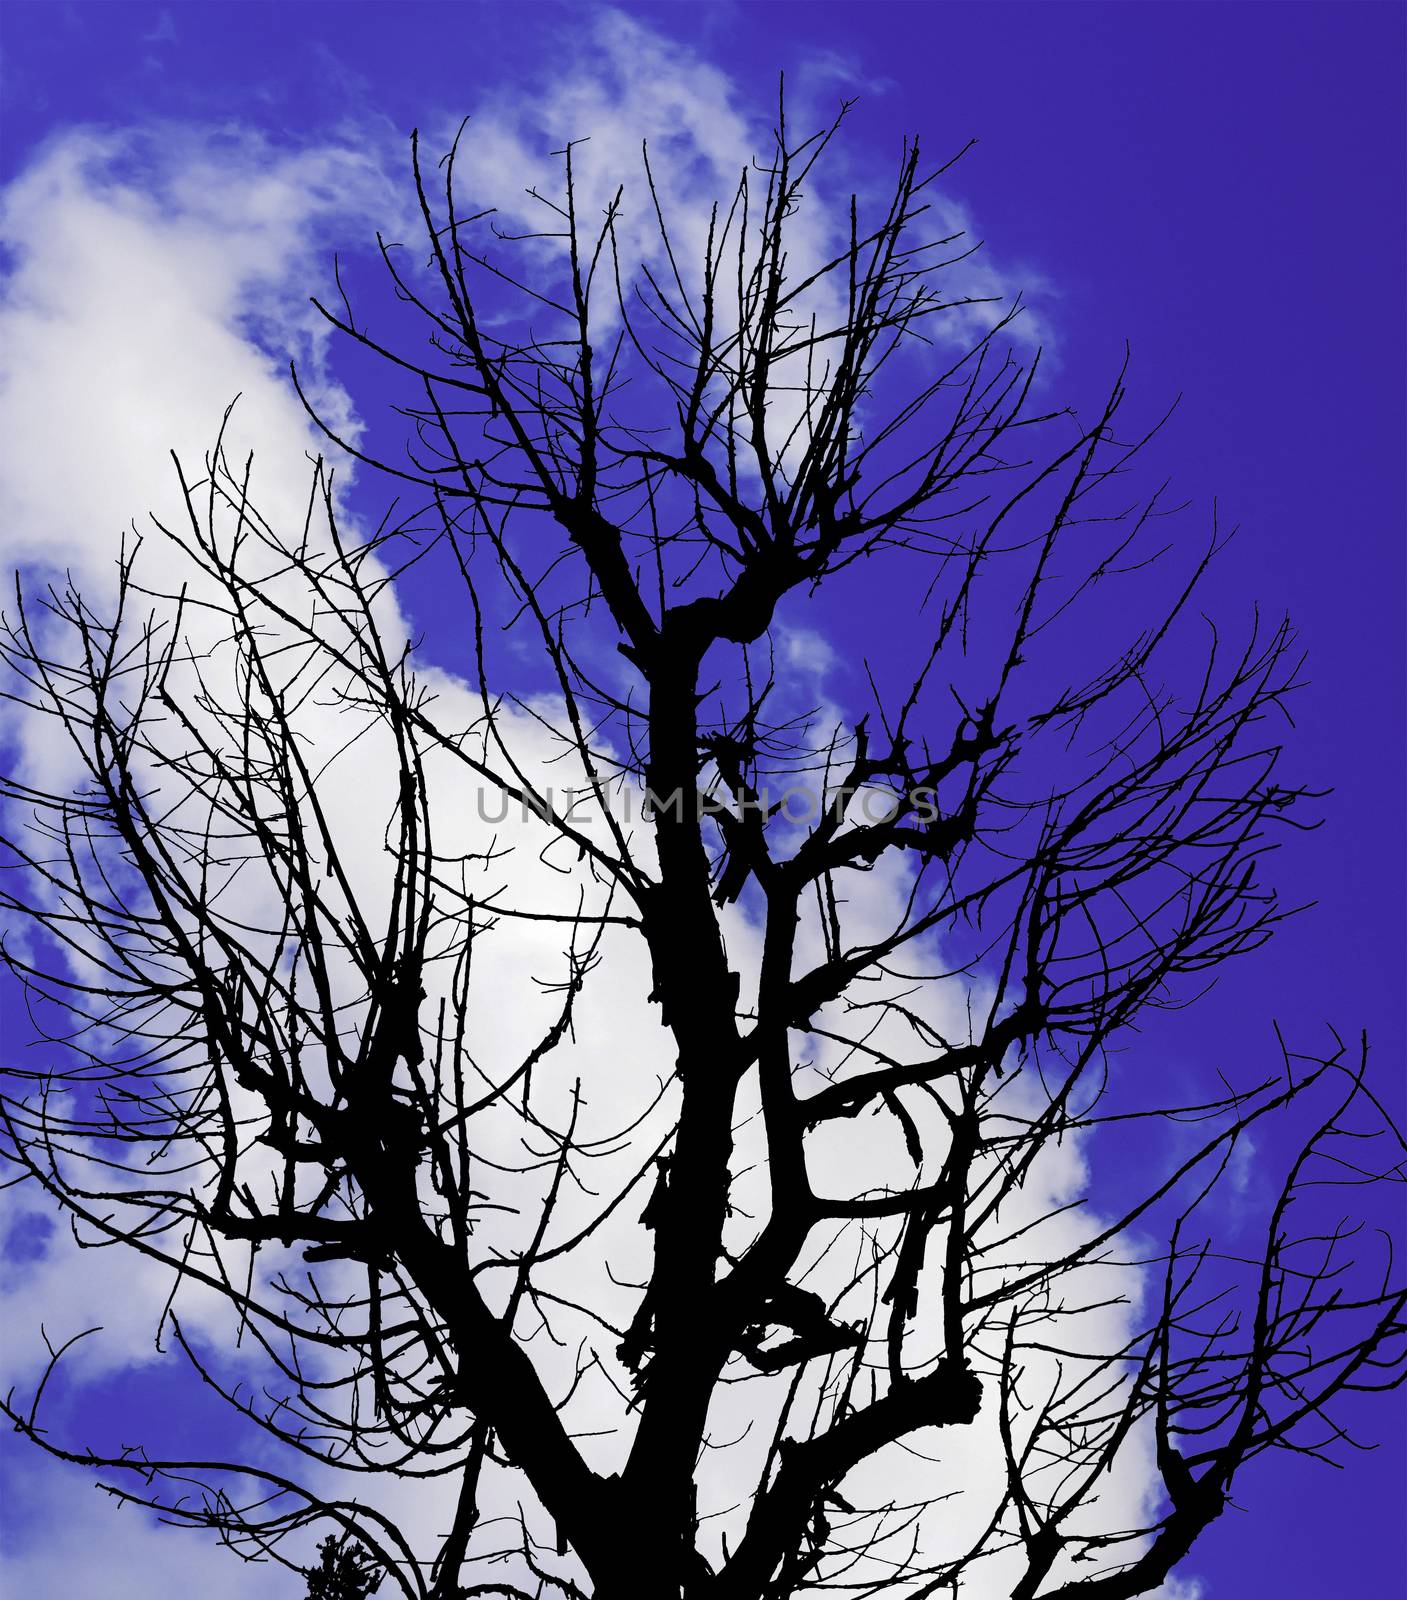 The Silhouette Dead Tree and Cloudy Blue Sky Background.